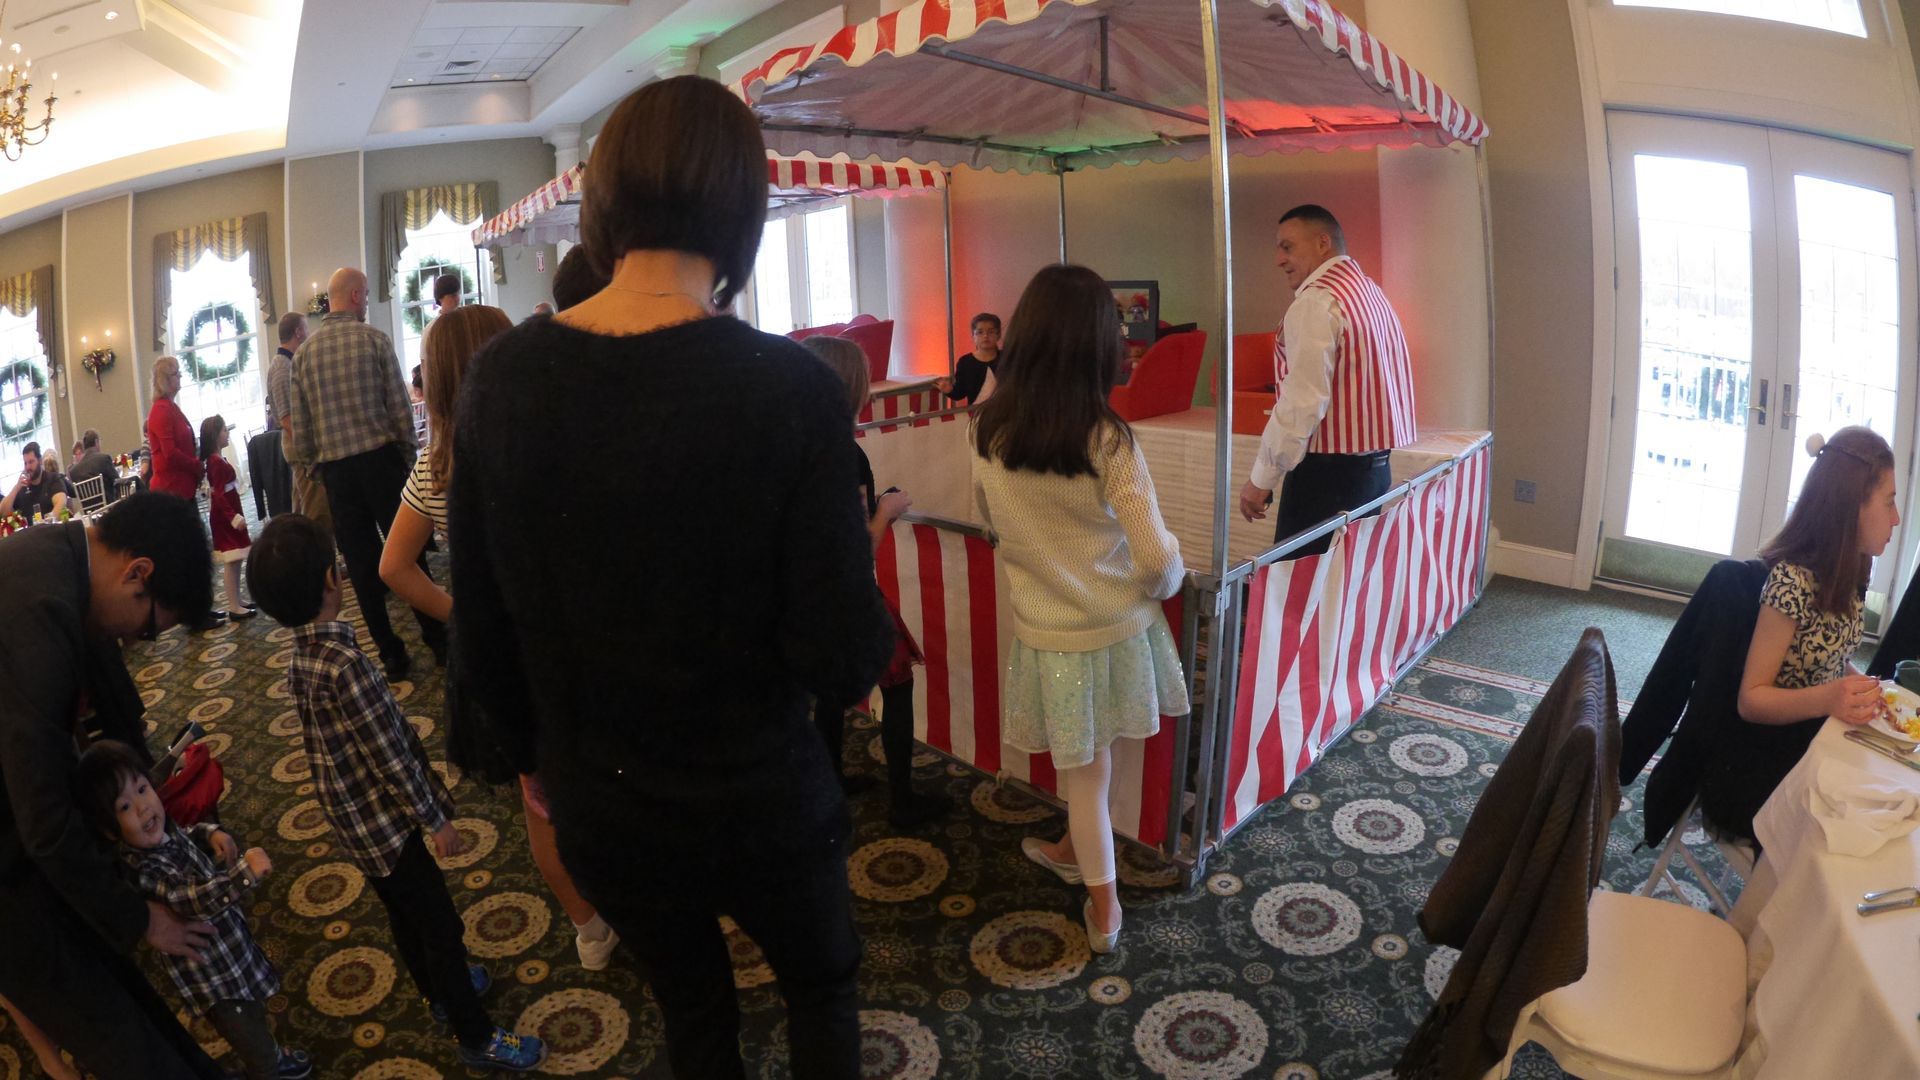 A group of people are standing around a carnival booth event rental in a room.